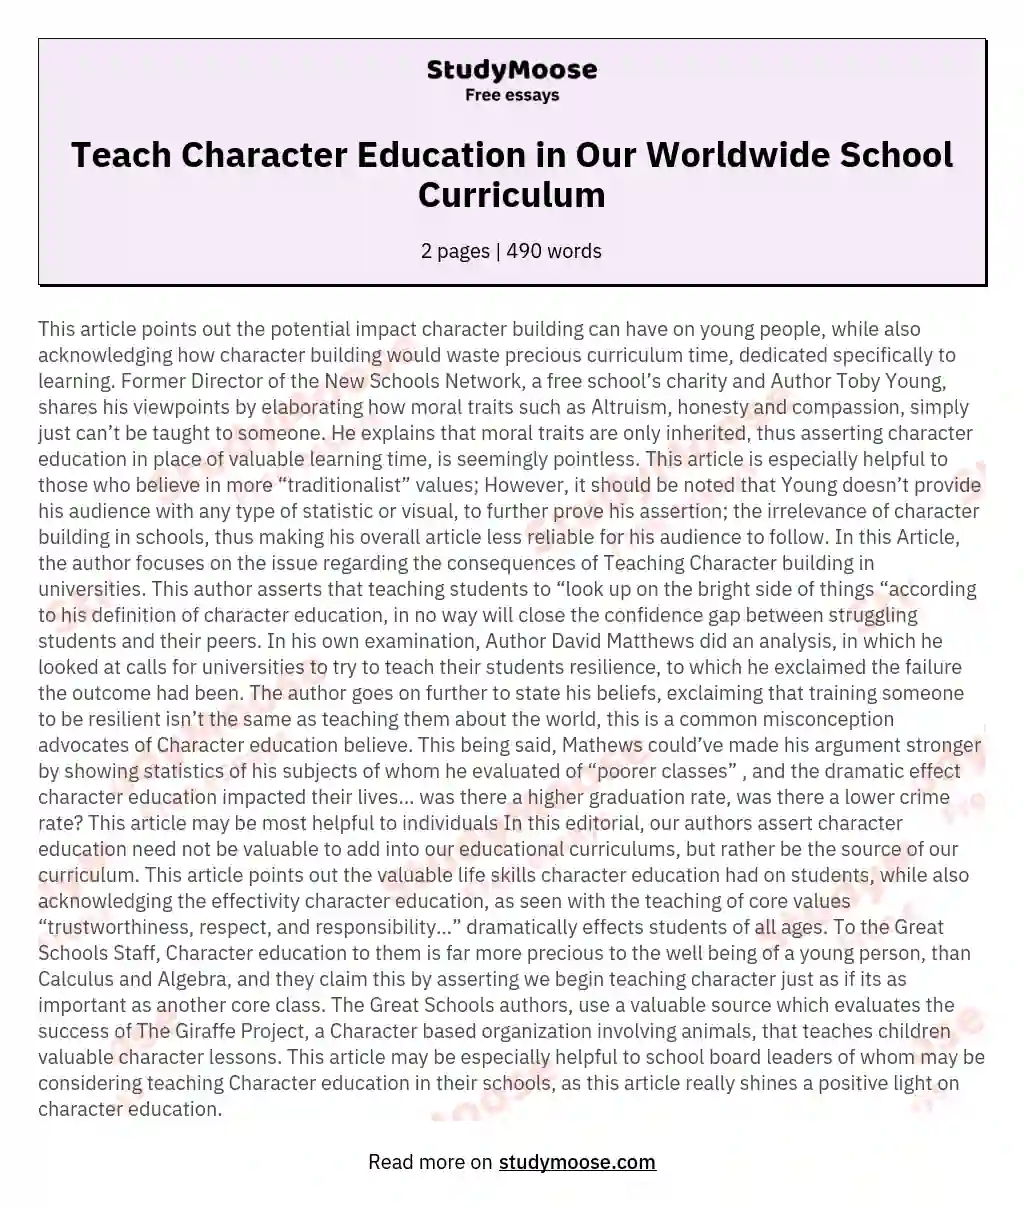 Teach Character Education in Our Worldwide School Curriculum essay